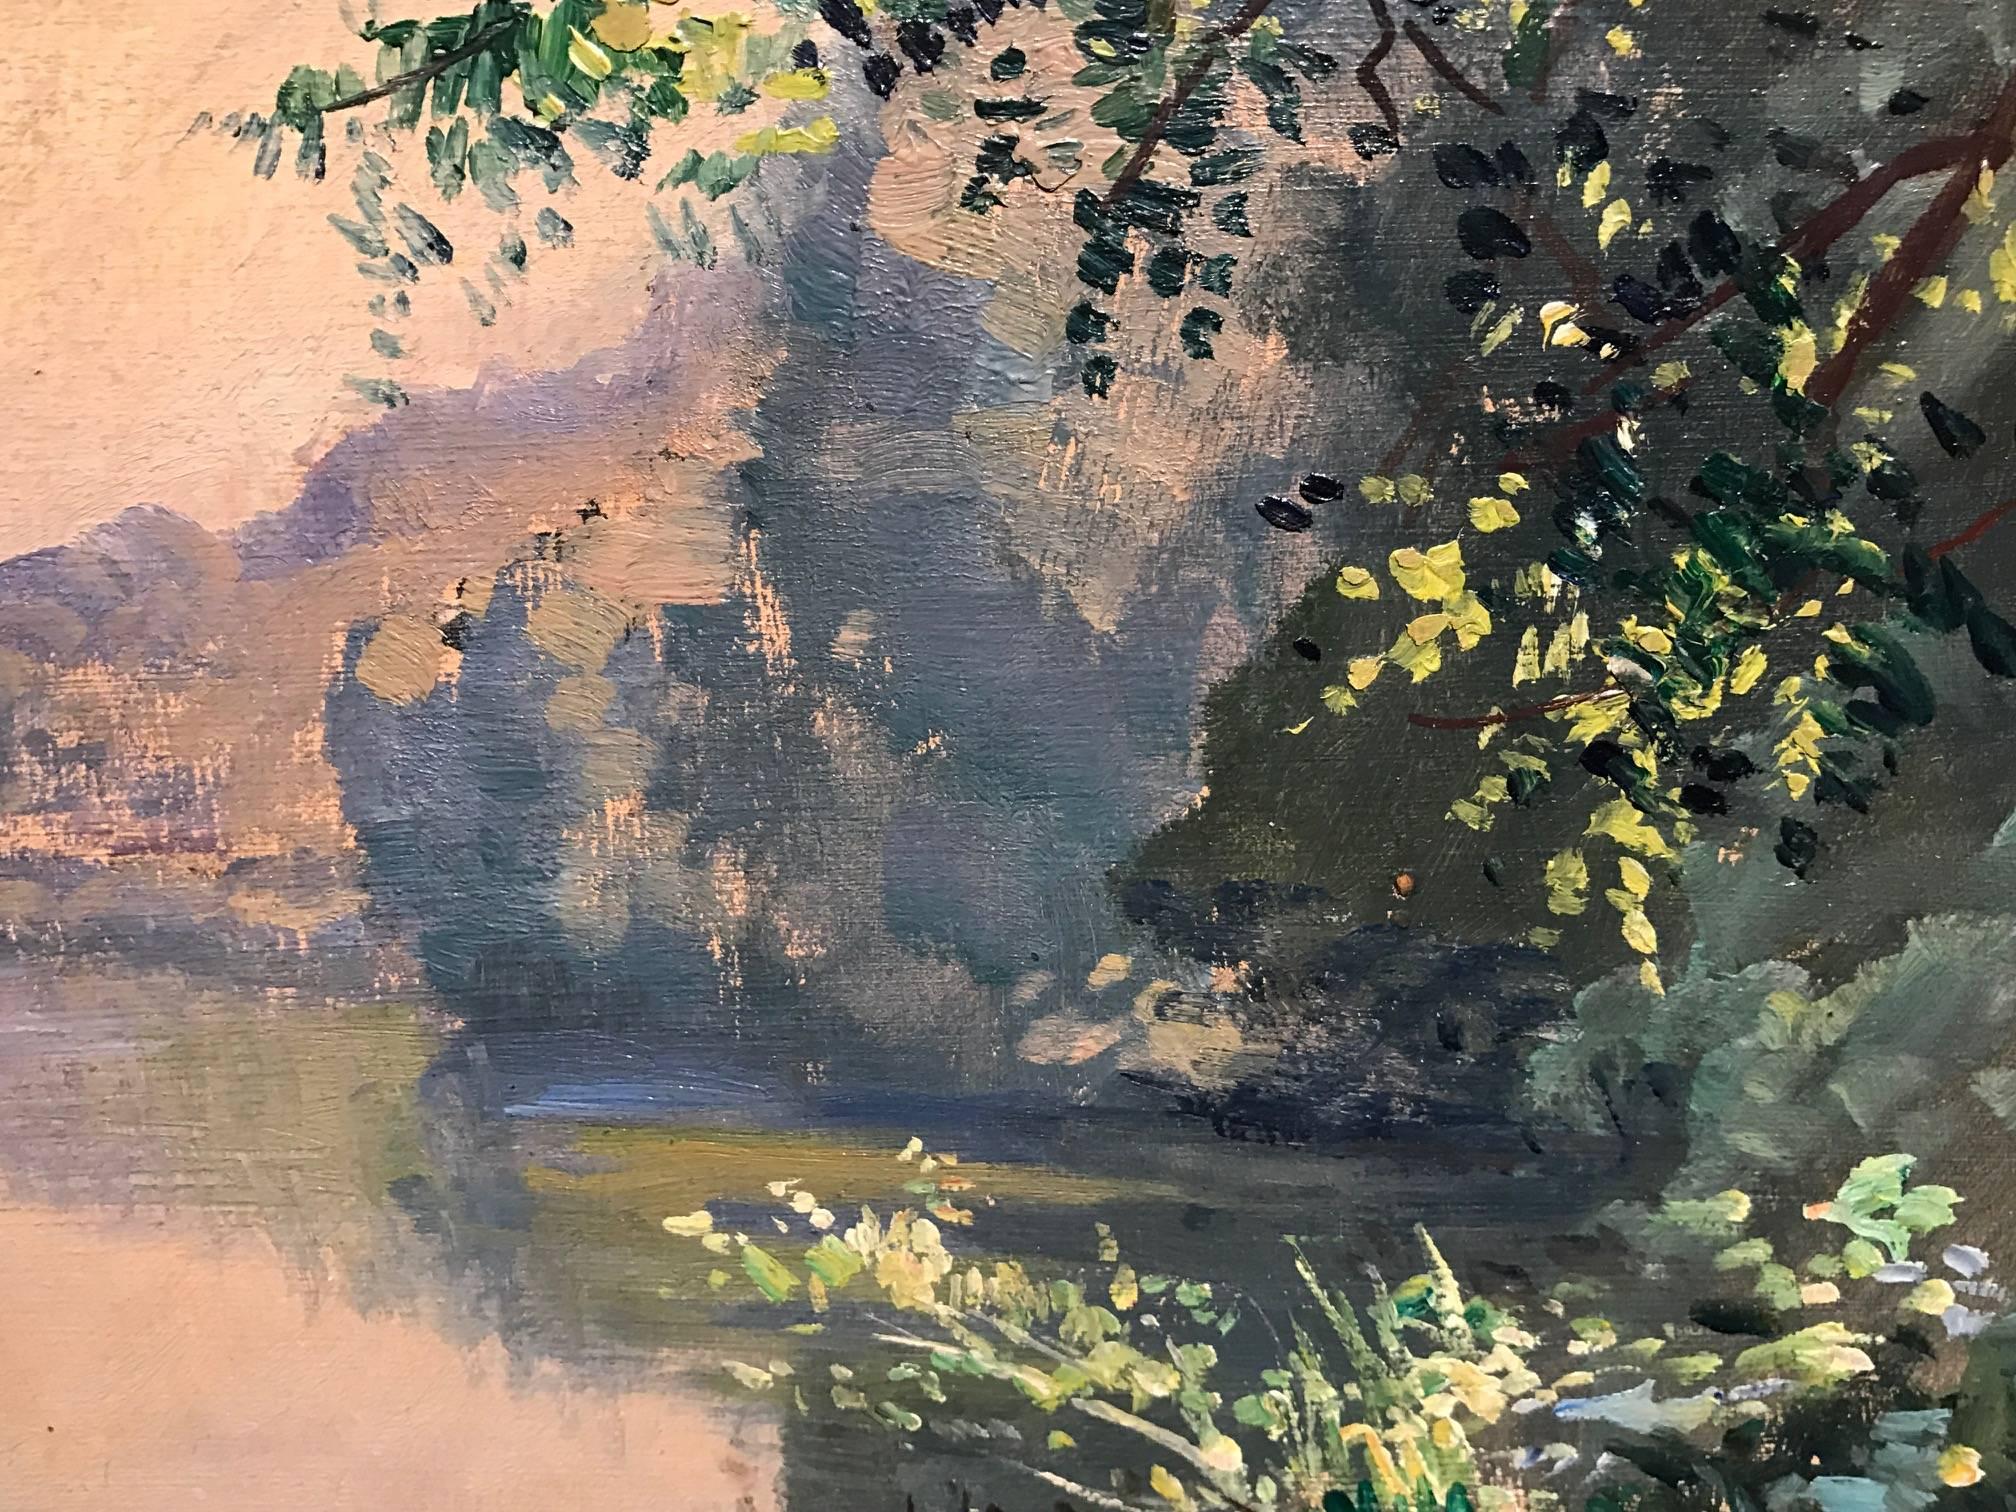 Superb original oil painting by the well listed French Impressionist painter, Emile Wegelin (1875-1962). Beautiful light and reflection upon the water. Signed lower left and in good condition.

A much sought after painter, Emile Wegelin devoted